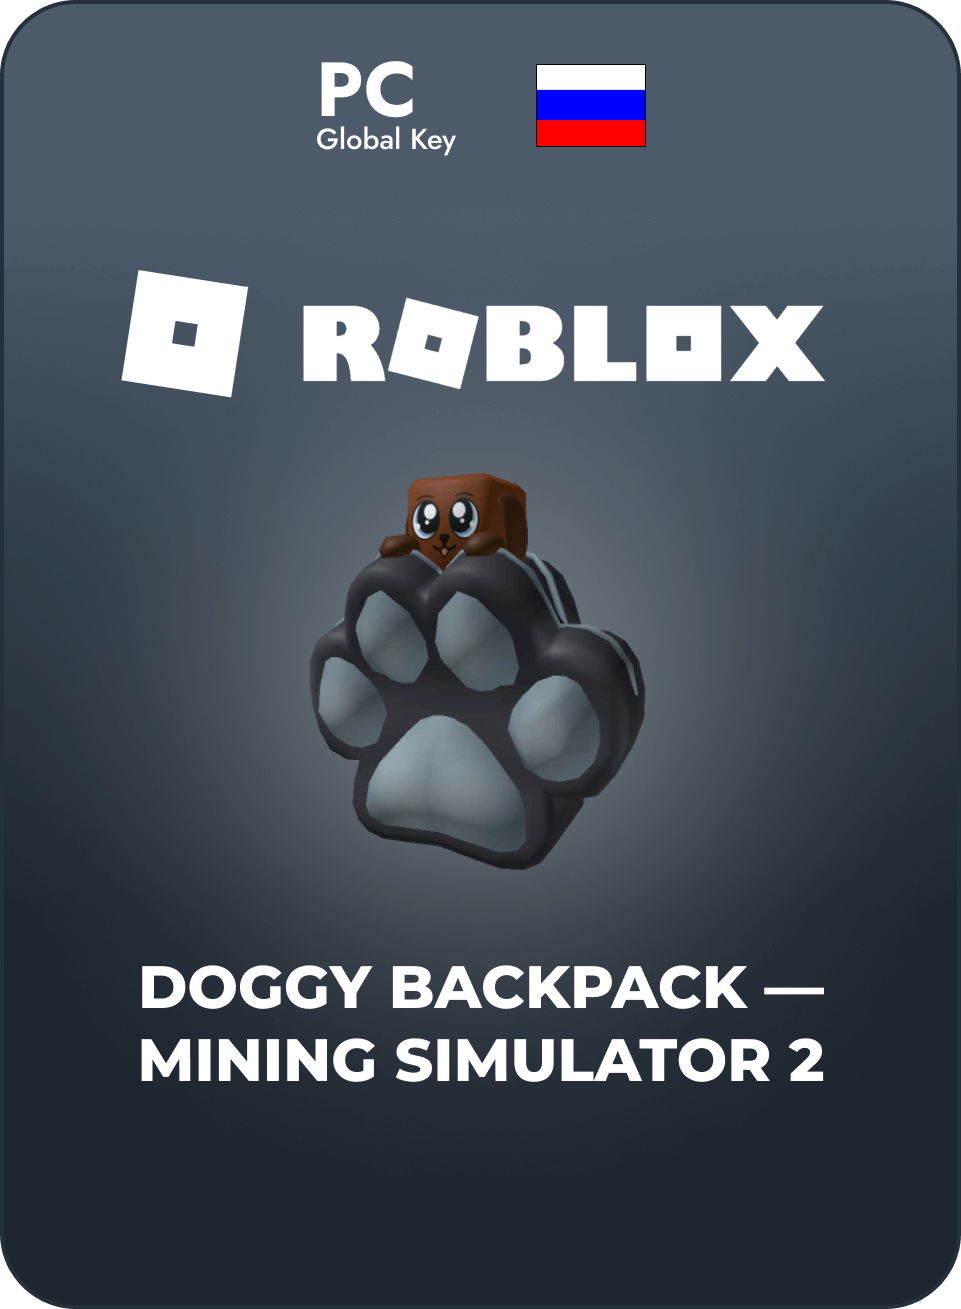 Headed to the mines? ⛏ Snag some sweet Mining Simulator 2 goodies for your @ Roblox experience with this drop: 🐶 Doggy Backpack 💎 10,000…